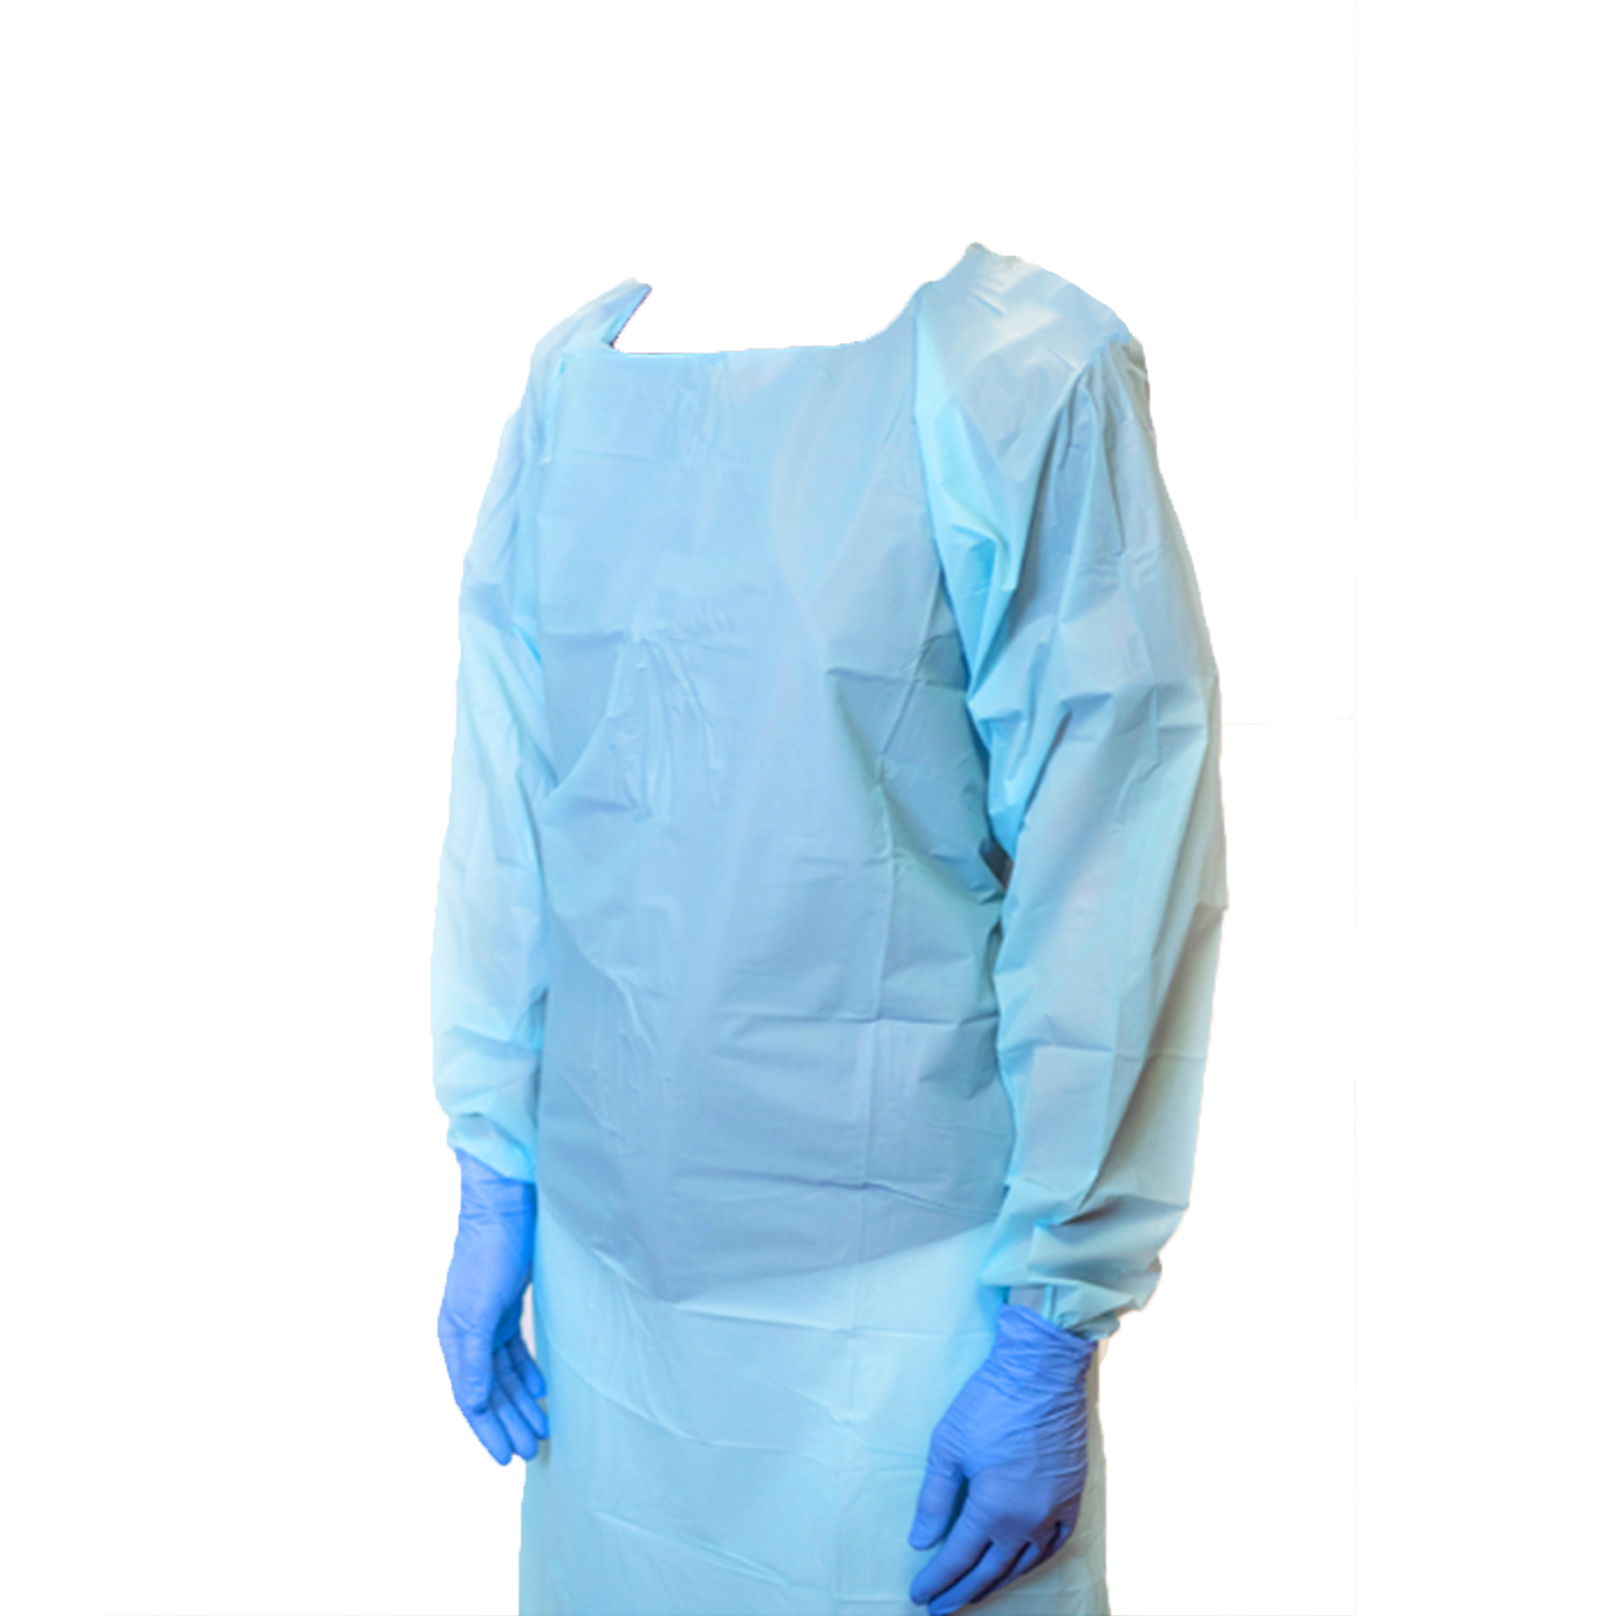 PharmPak: Your Trusted PPE Supplier for Comprehensive Safety Solutions